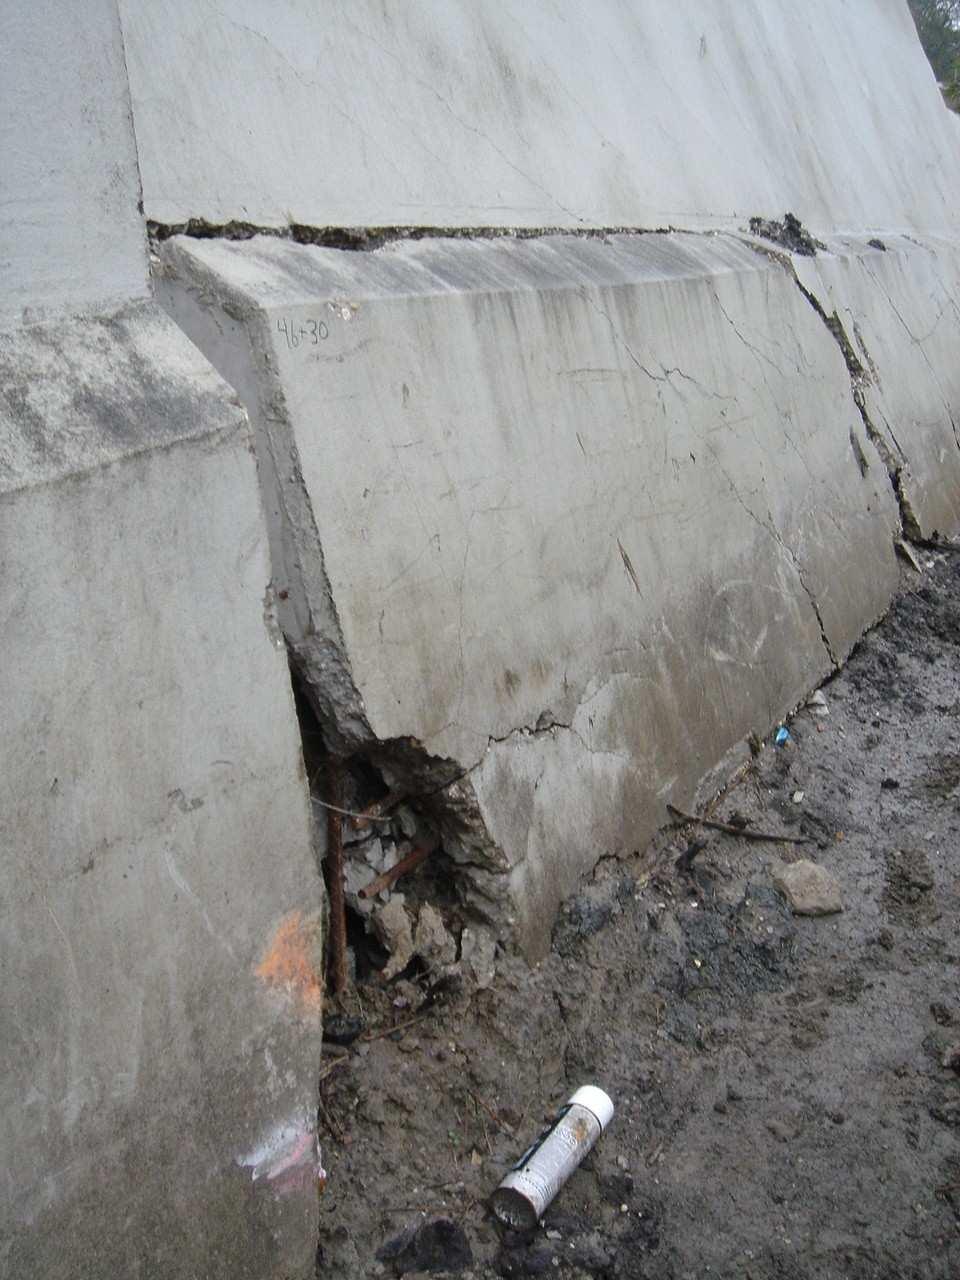 20 indicates that the soil failed and not the structure (i.e. concrete wall and sheet pile).